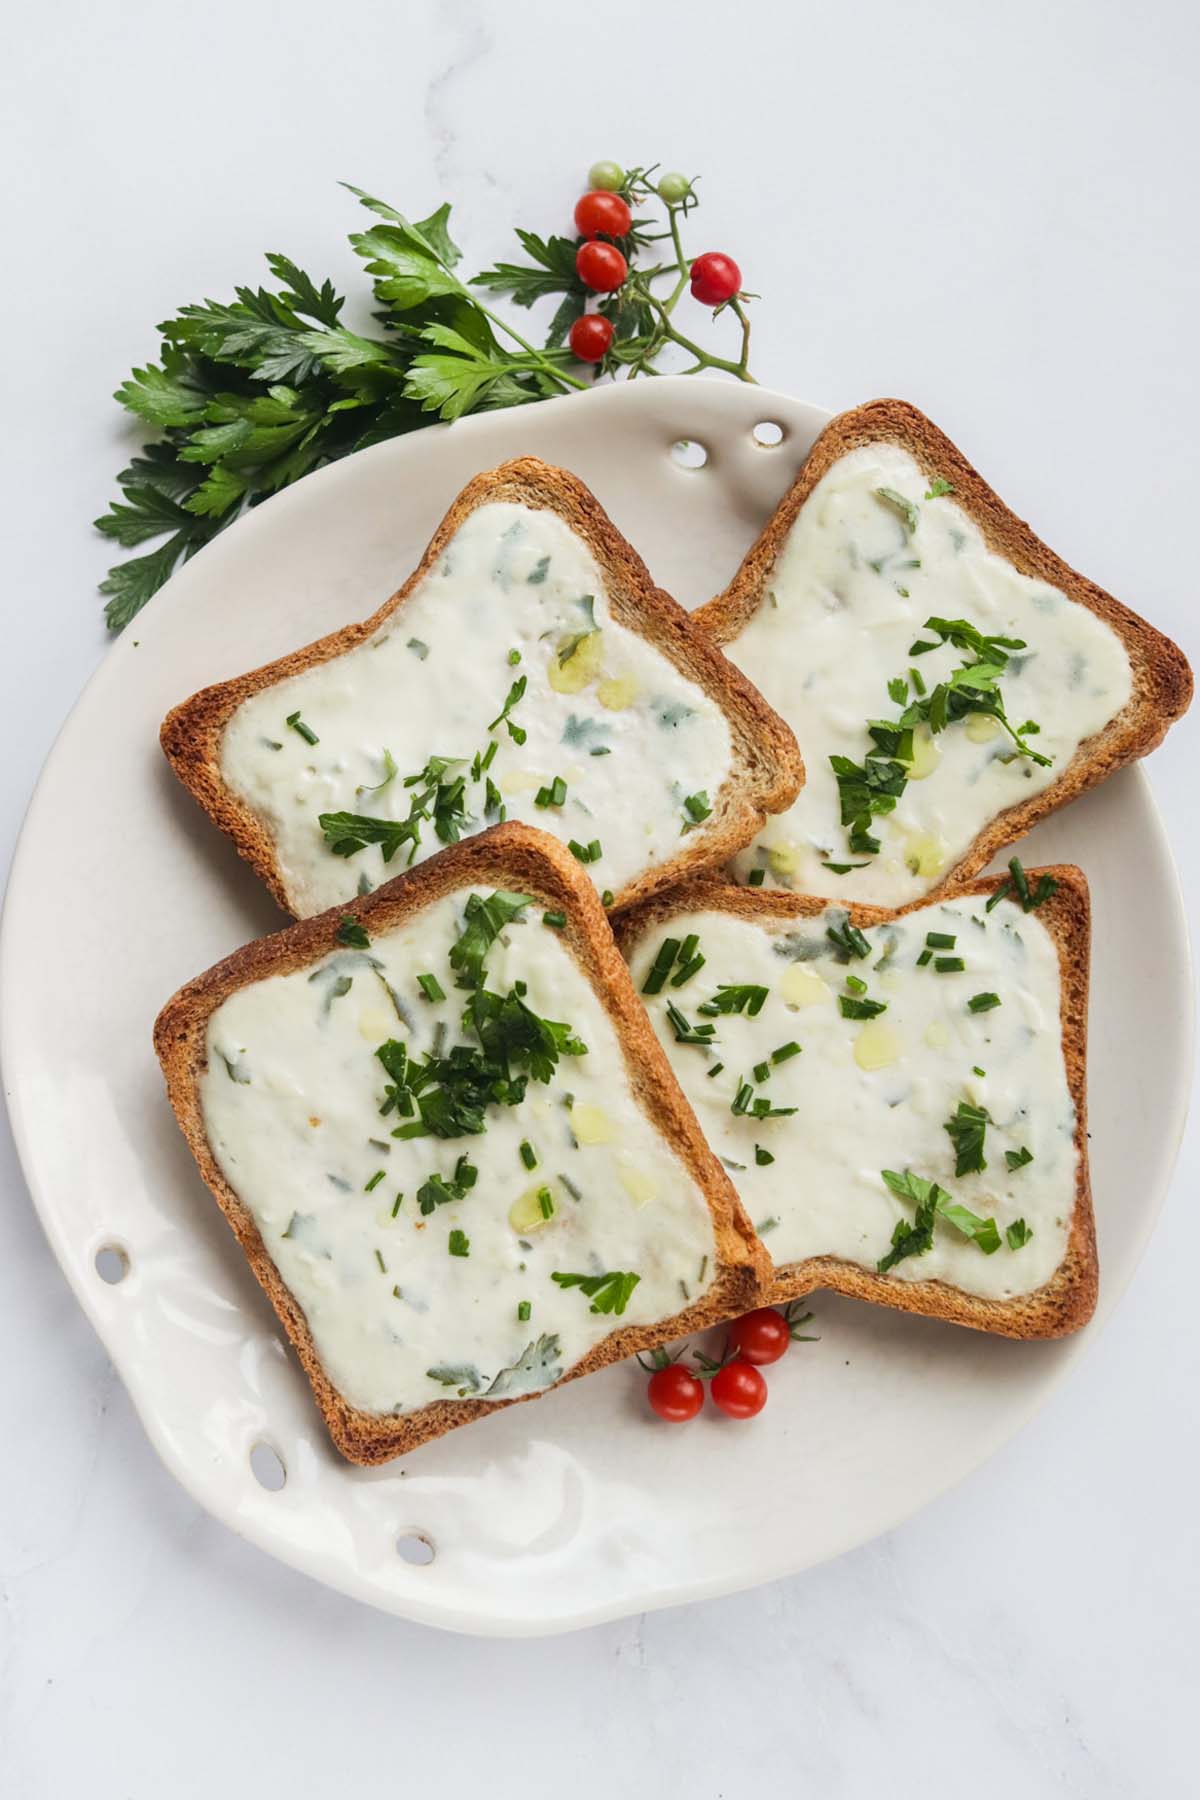 Garlic bread on a plate topped with chopped parsley.